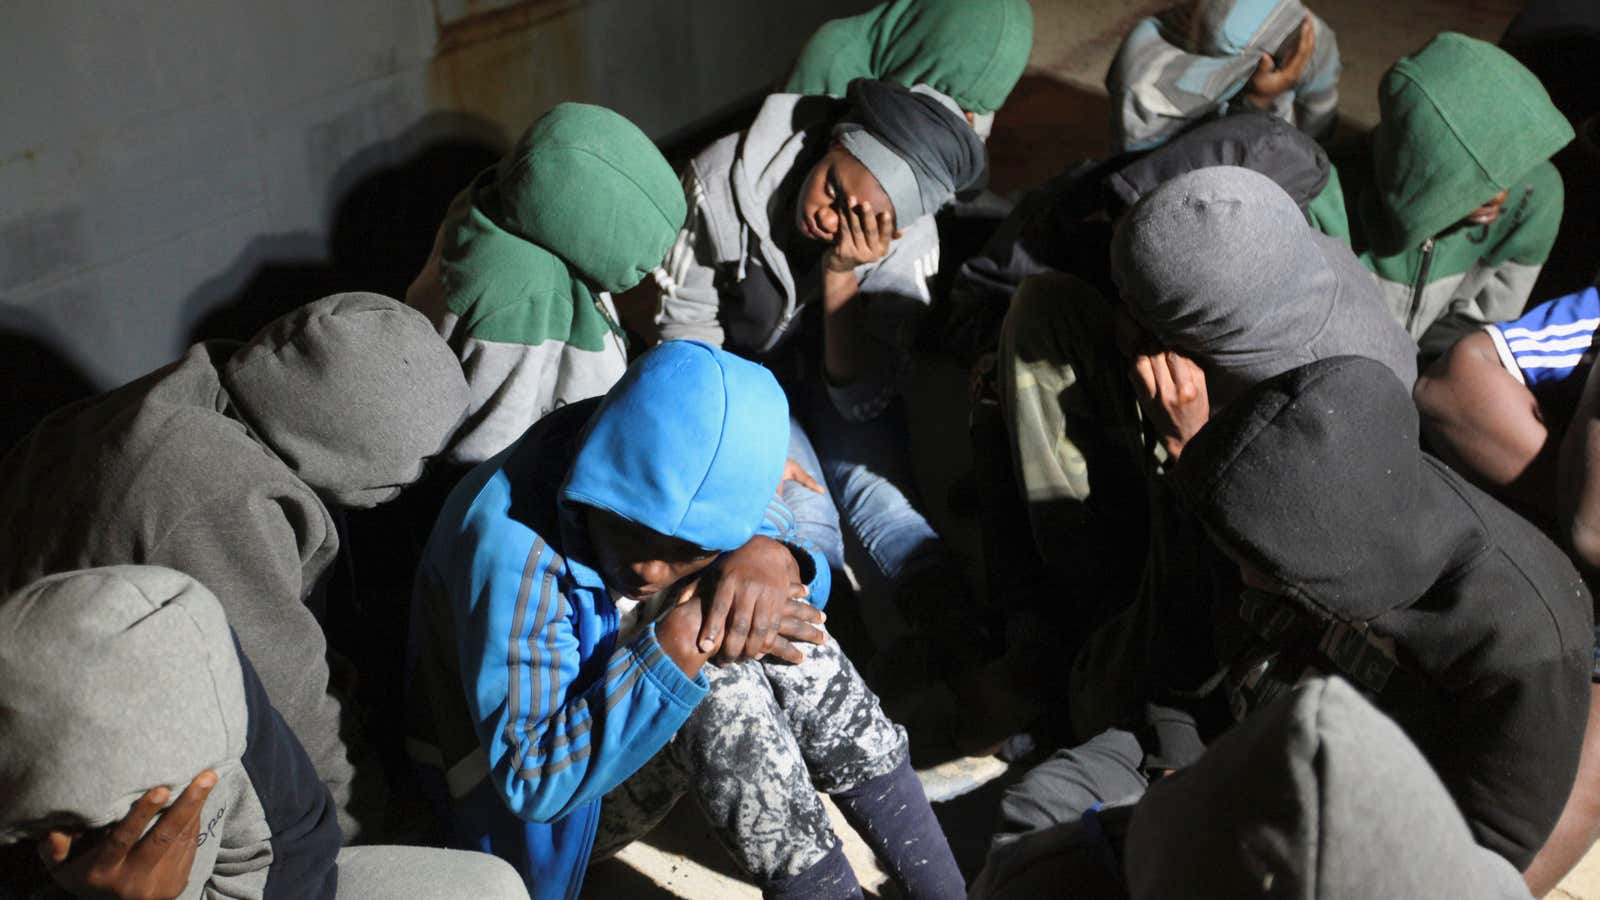 Migrants at a naval base after being rescued by Libyan coastguard, in Tripoli, Libya.